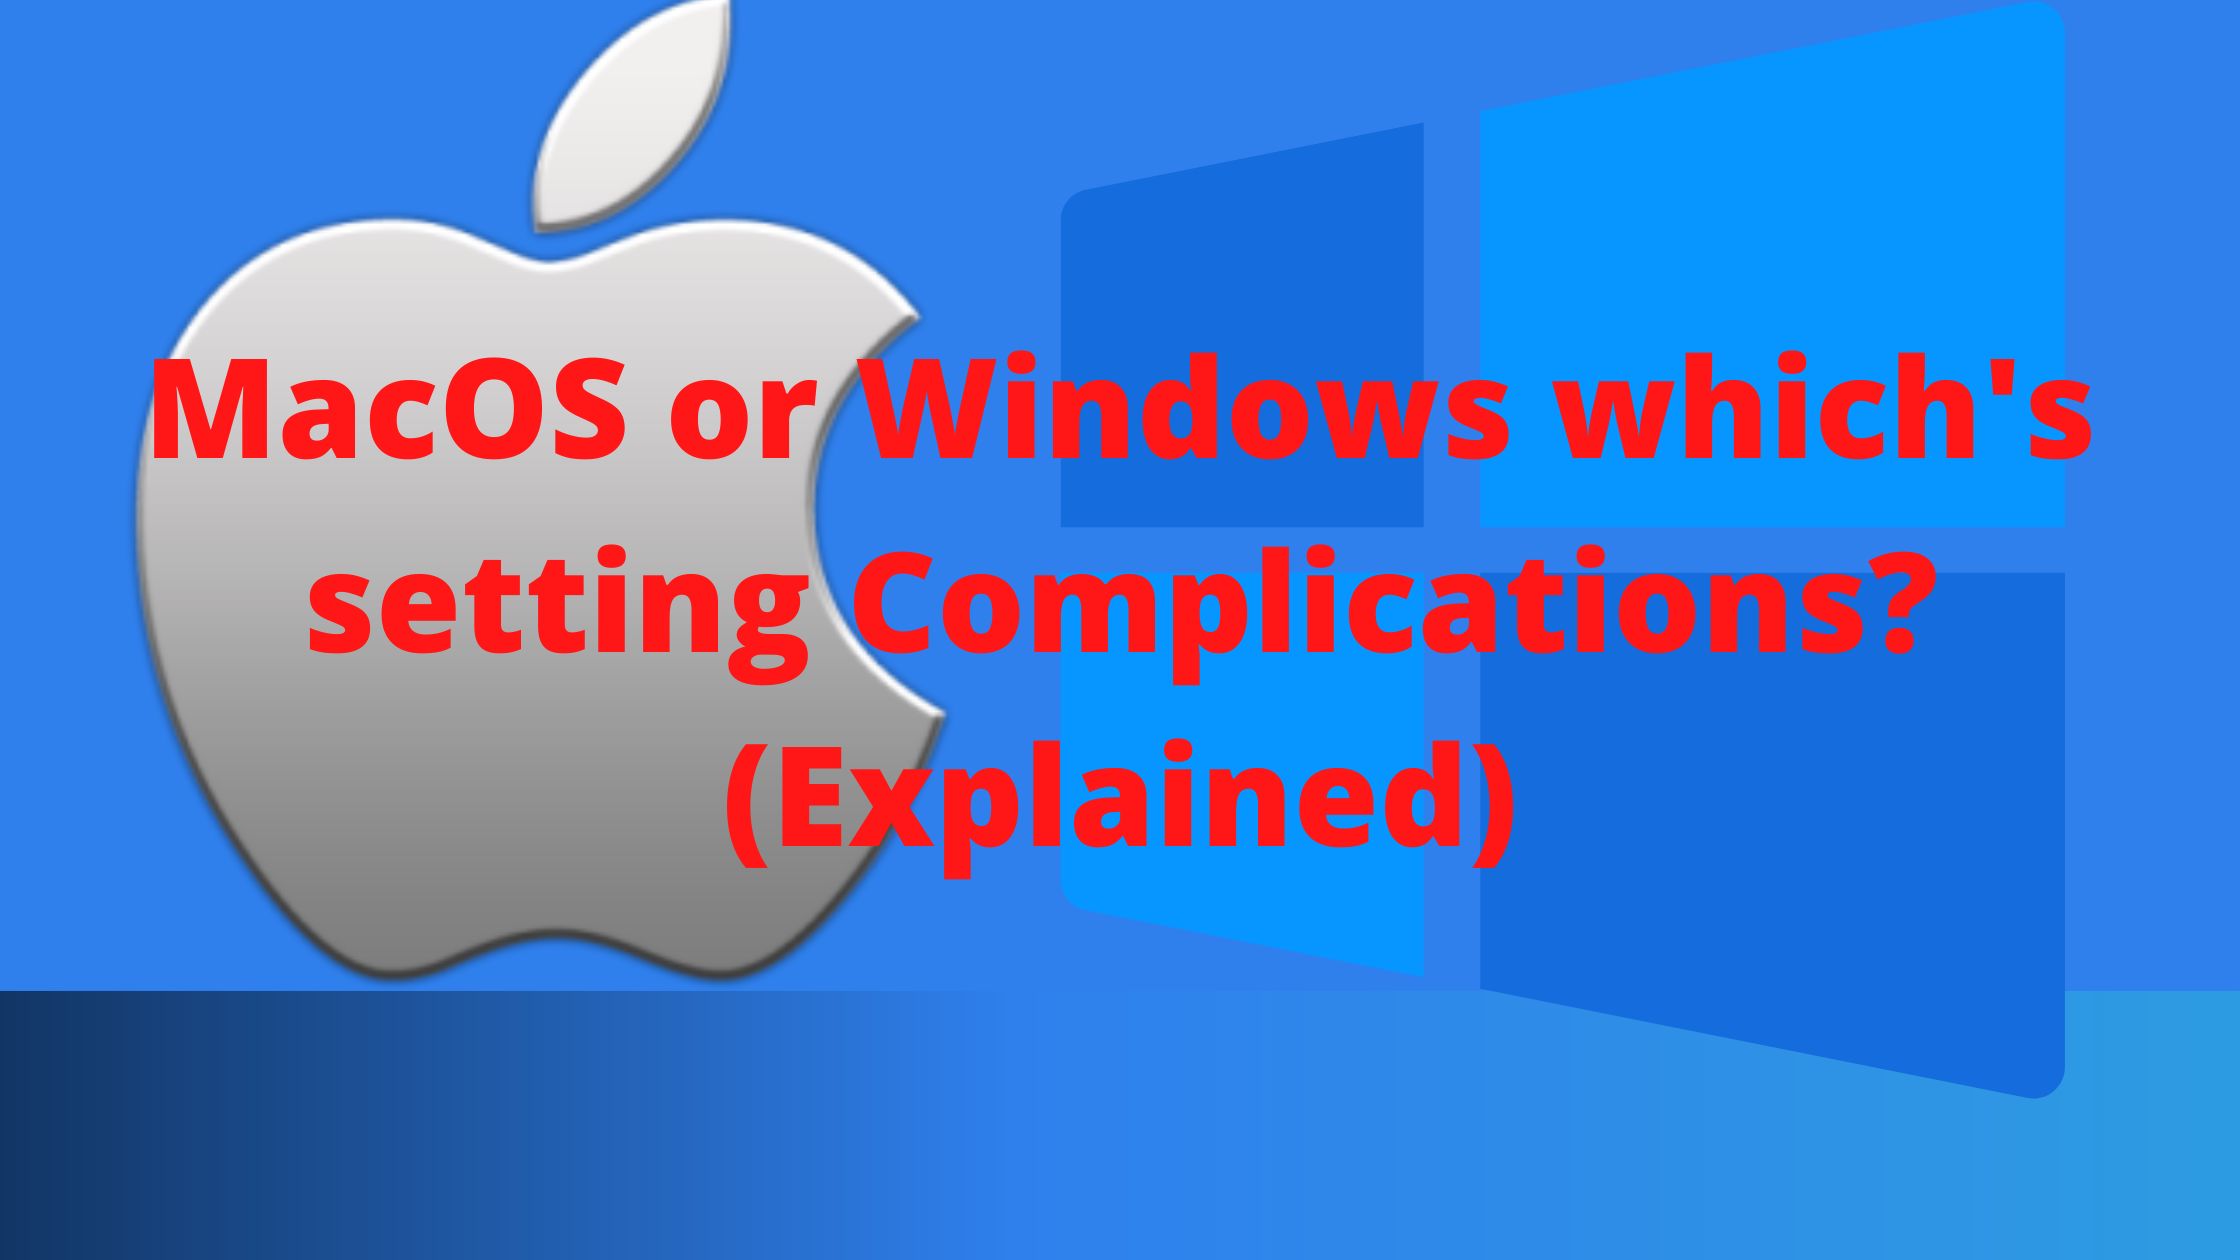 MacOS or Windows which’s setting Complications? (Explained)